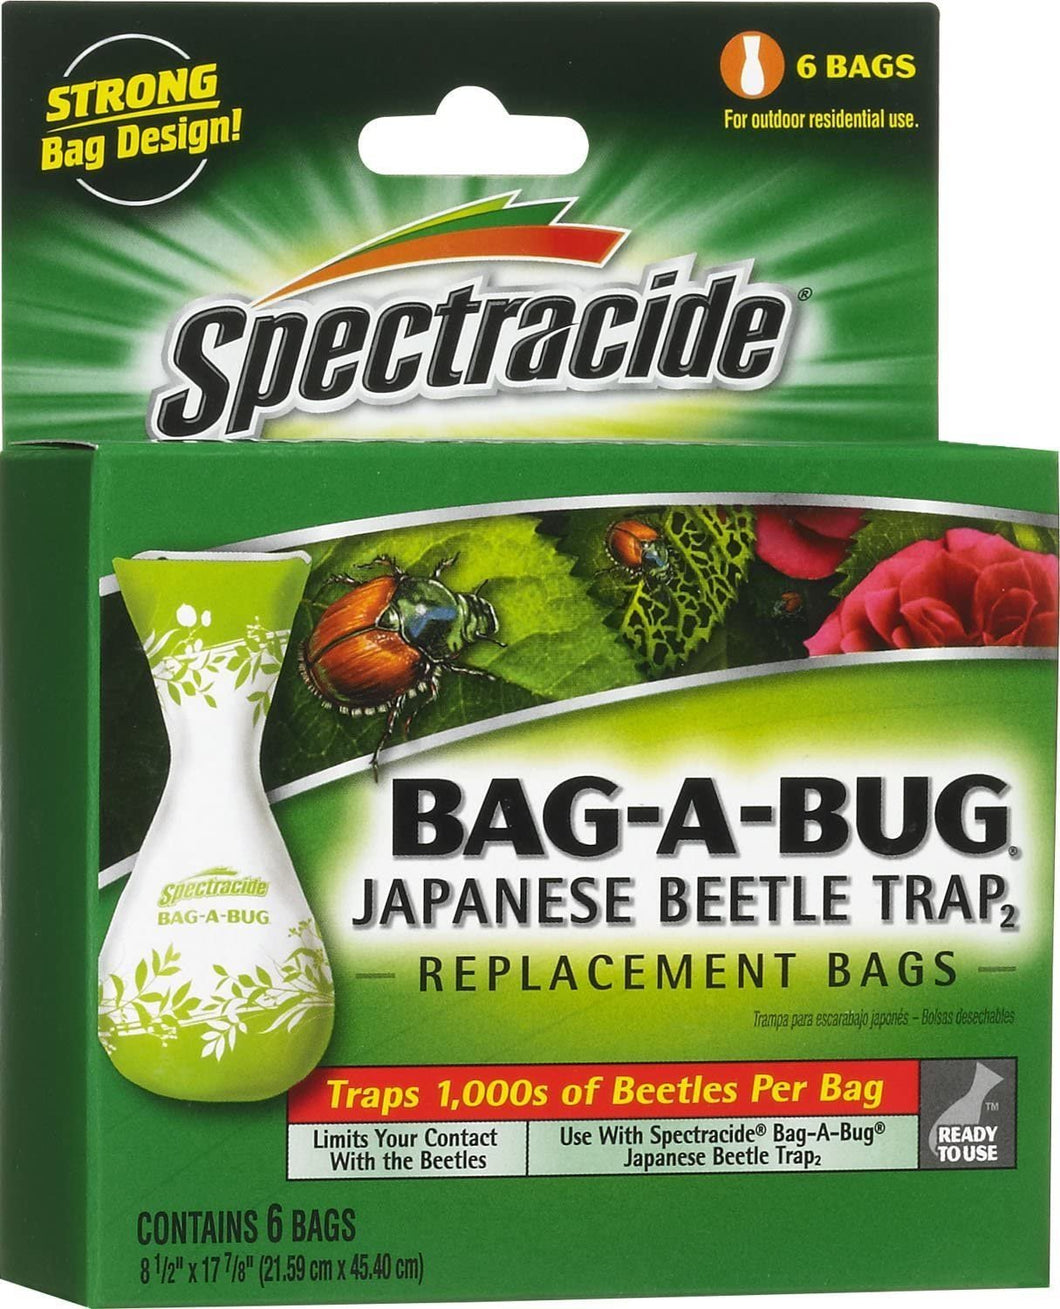 Spectracide Bag-A-Bug Japanese Beetle Trap2 (6 Replacement Bags) (HG-56903) (2 Pack of 6 Bags)